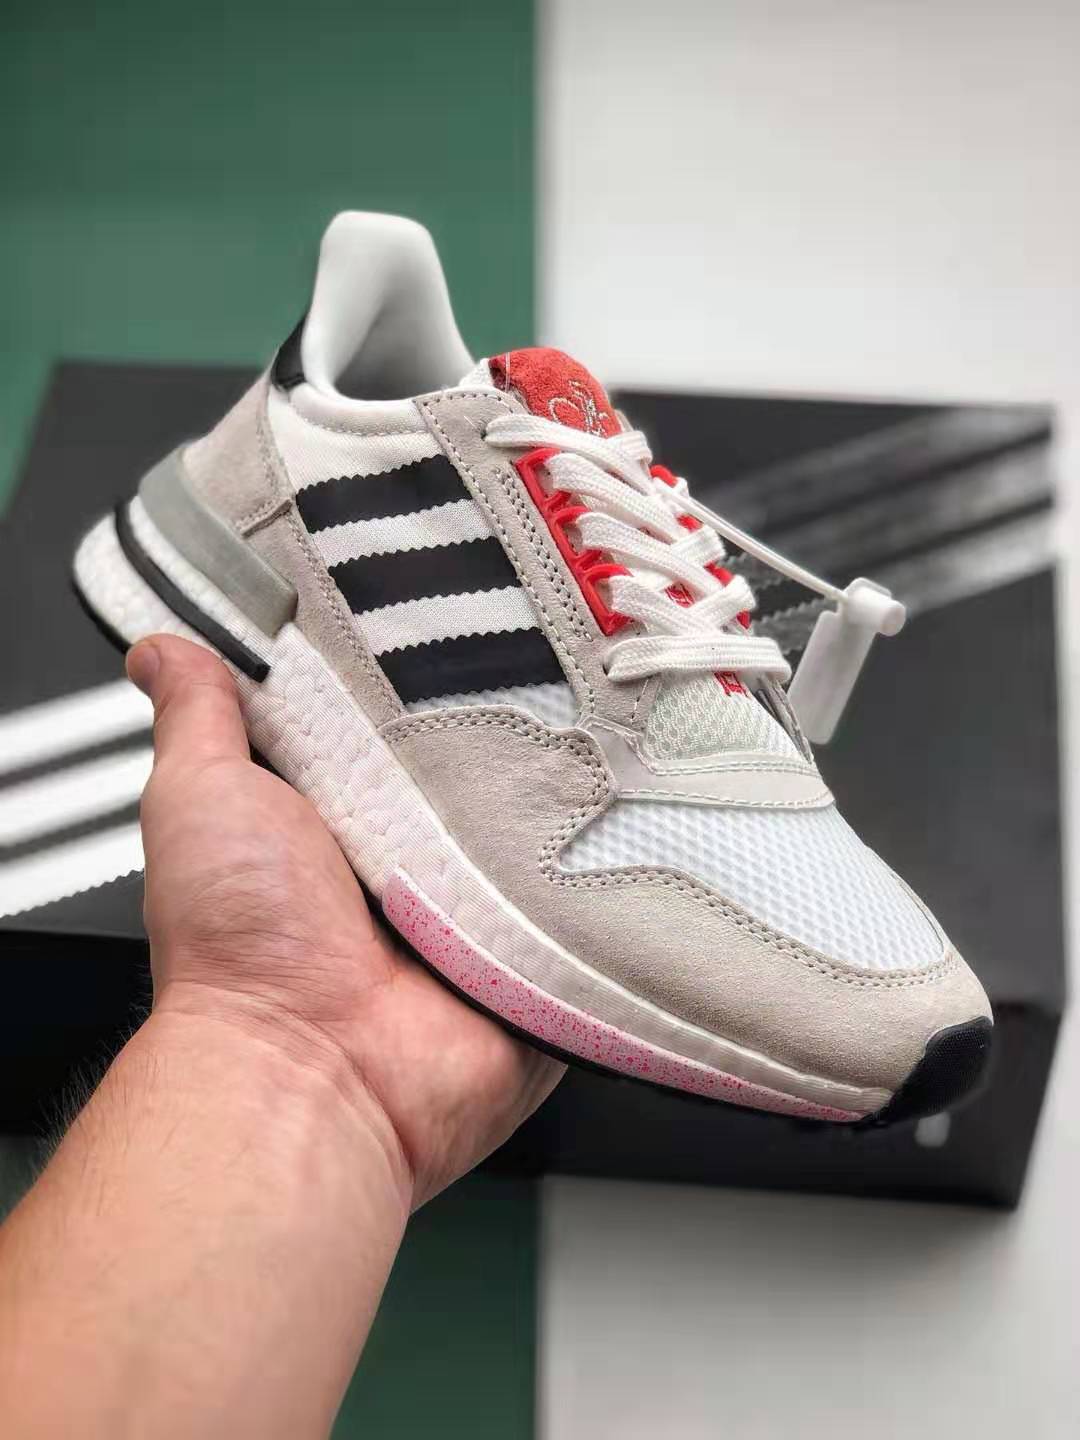 Adidas Forever Bicycle x ZX 500 RM Chinese New Year G27577 - Limited Edition CNY Sneakers